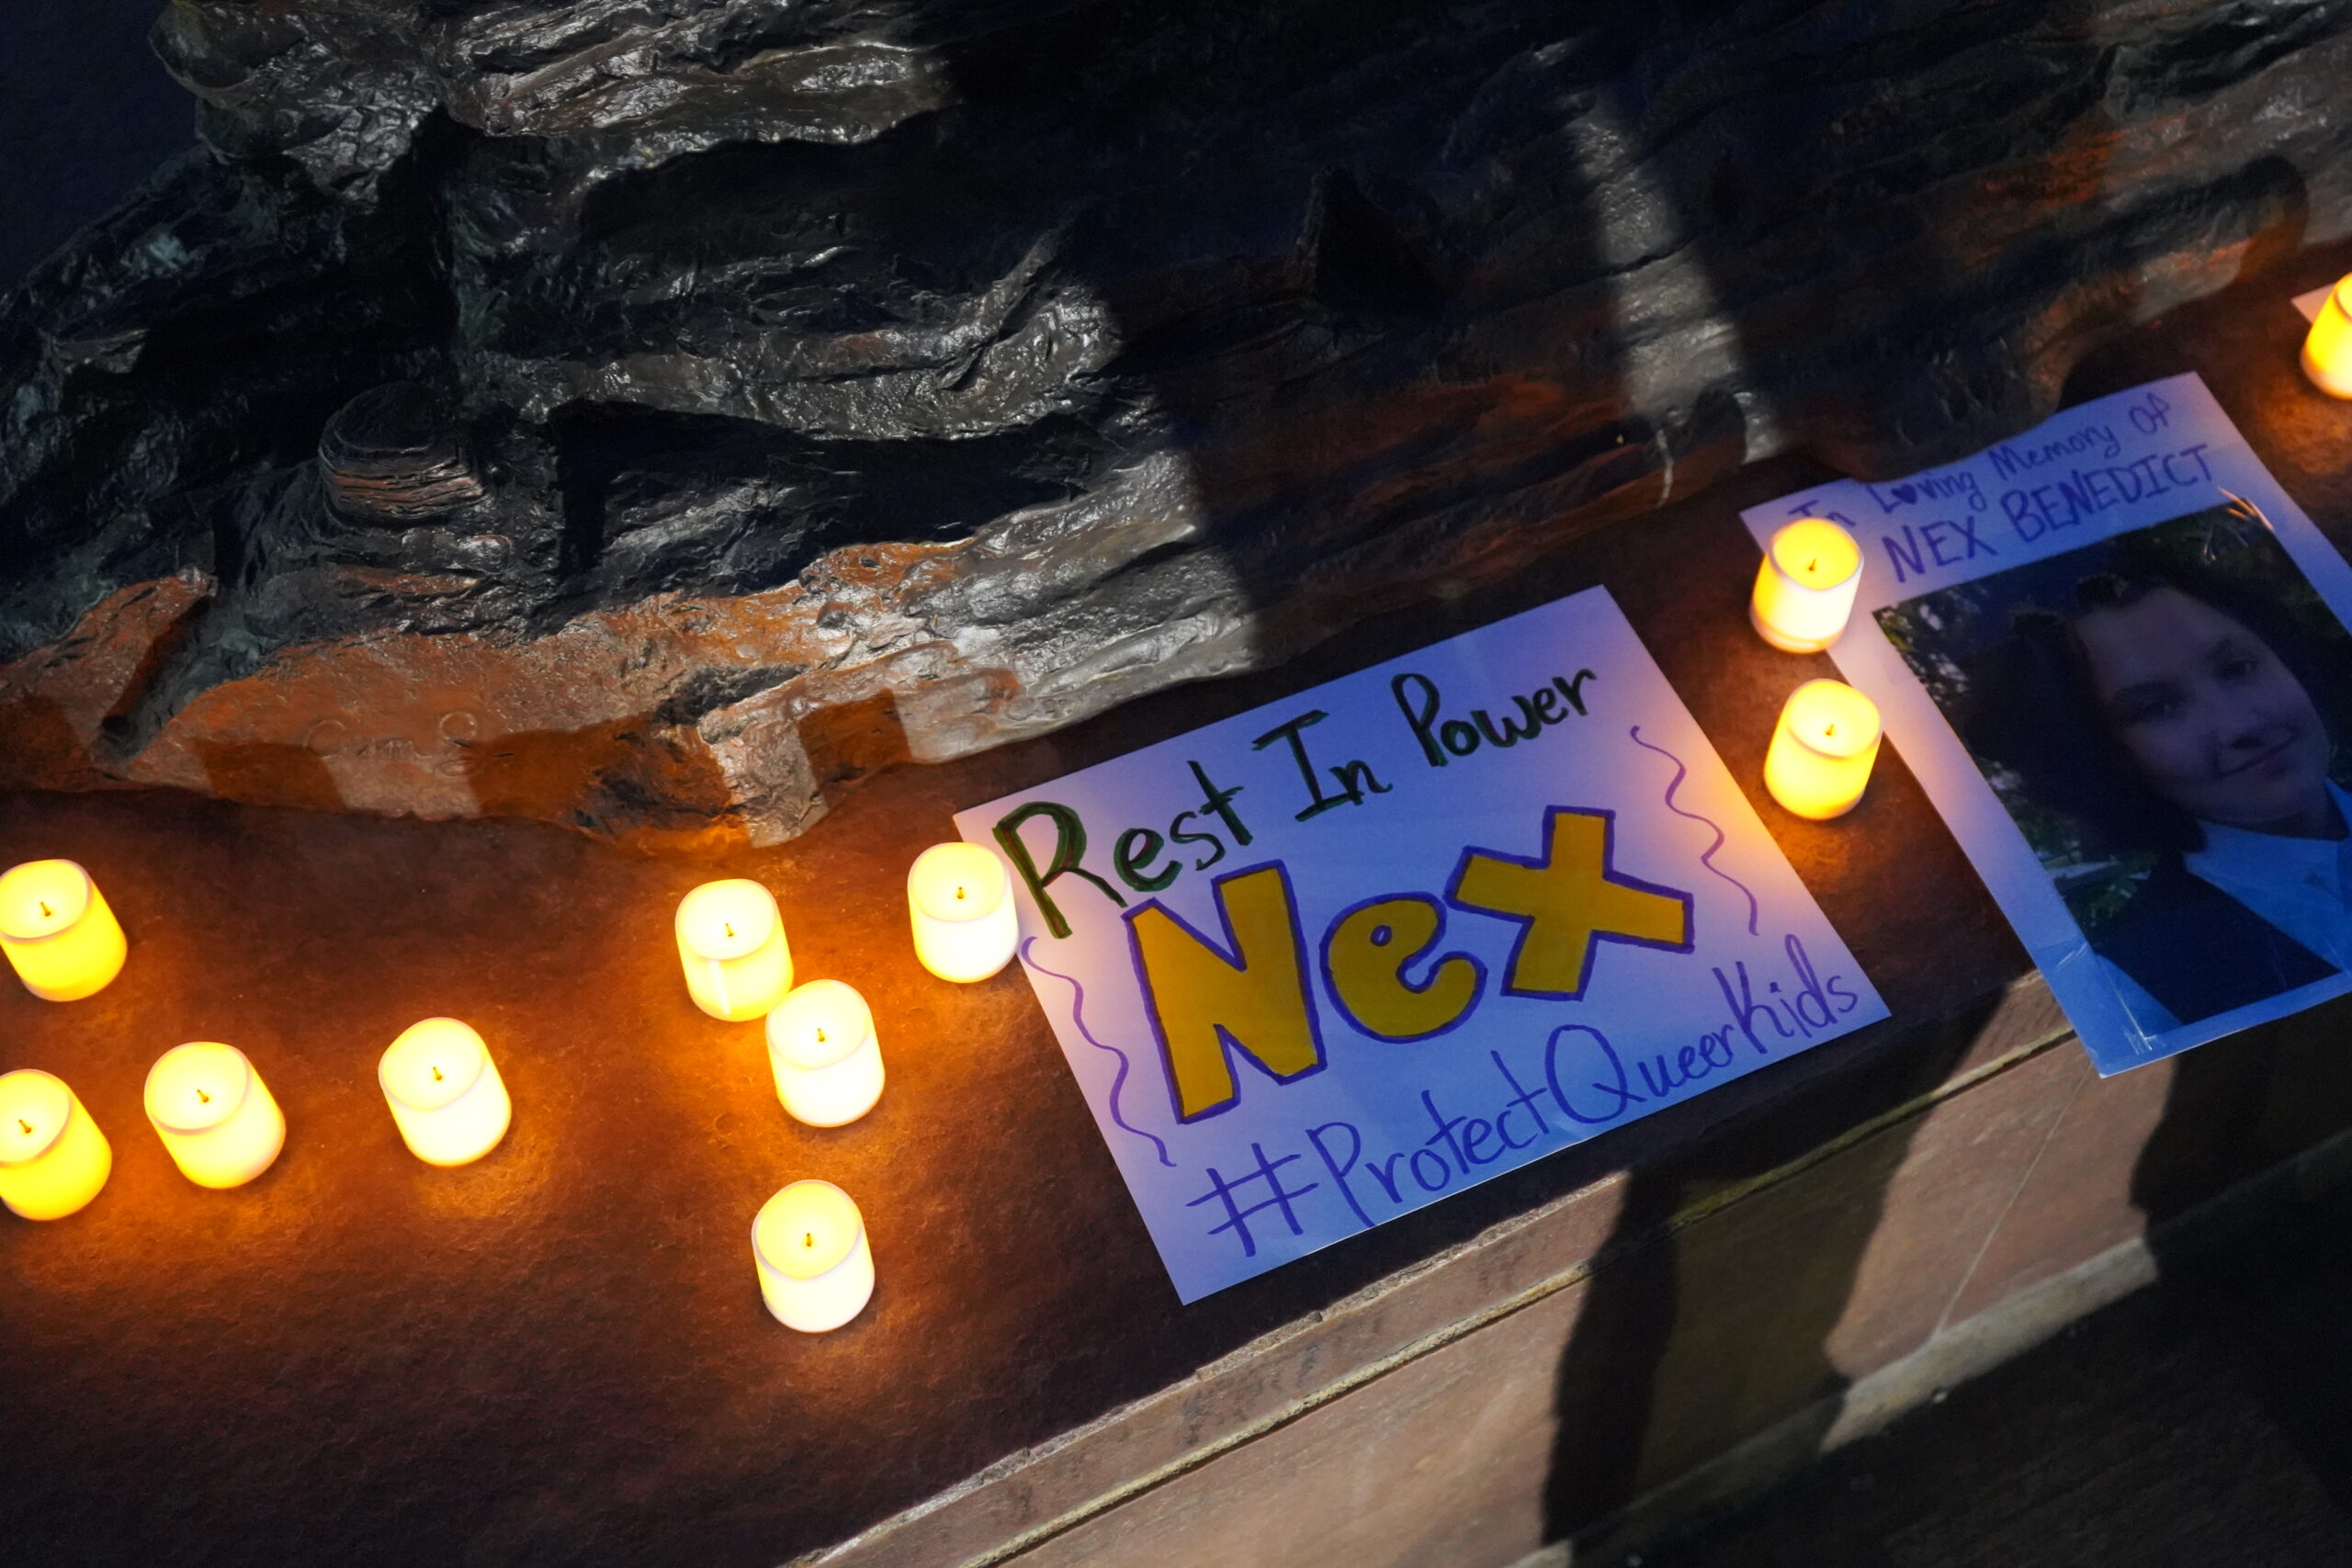 USD Hosts Candlelight Vigil to Honor the Life of Non-Binary Student Nex Benedict